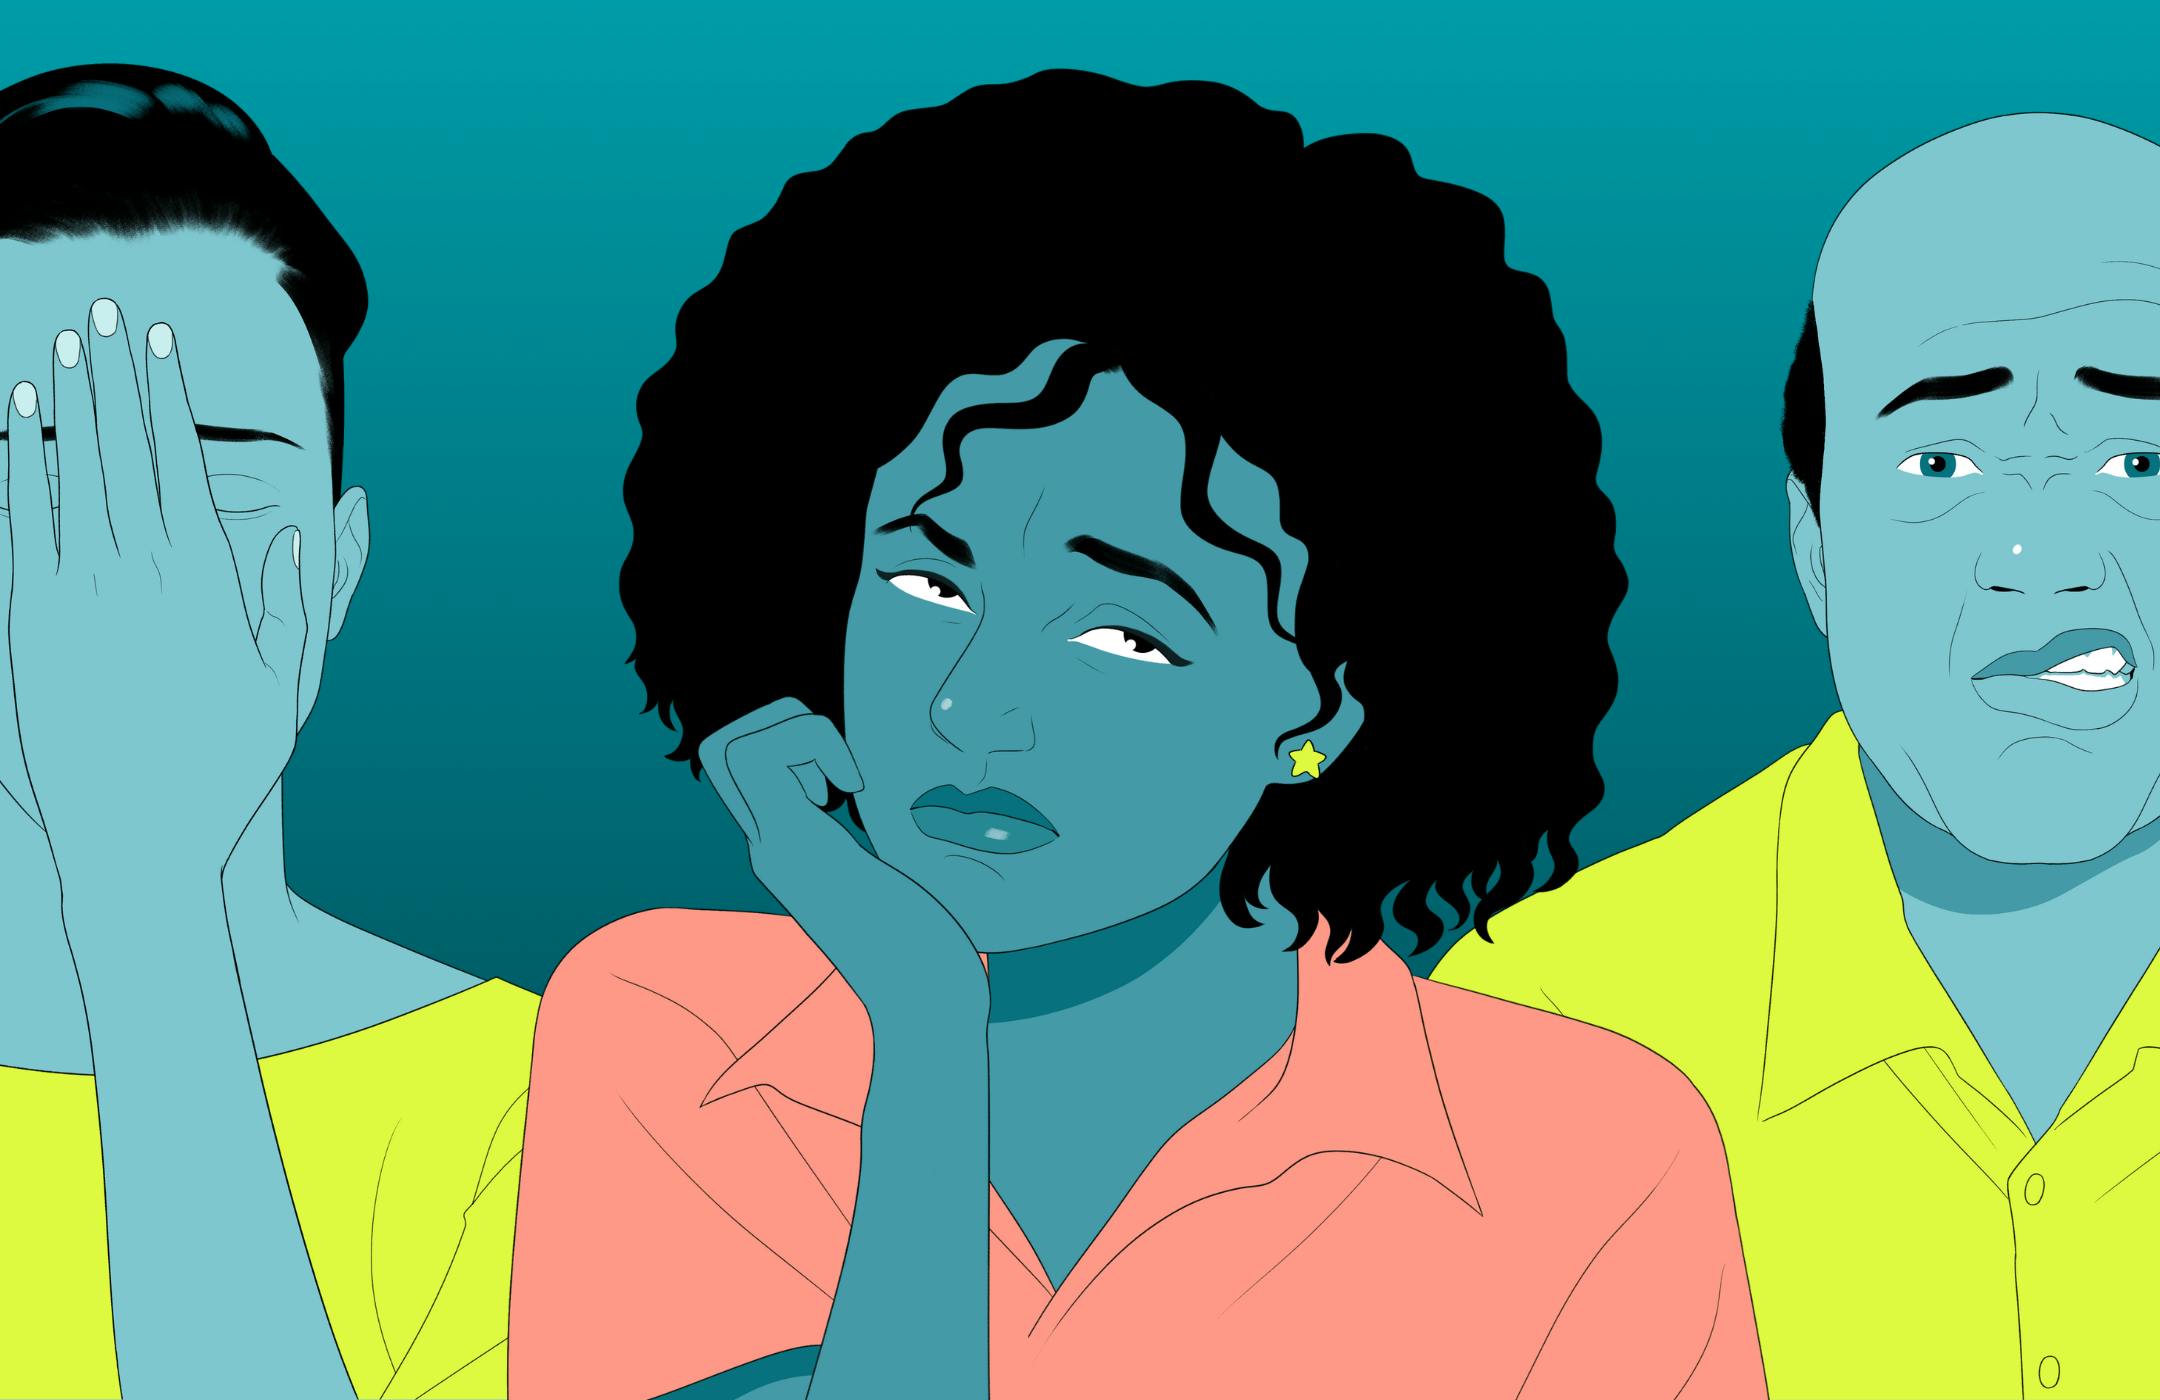 Illustration in teal tones of a woman with curly dark hair and a disappointed expression.